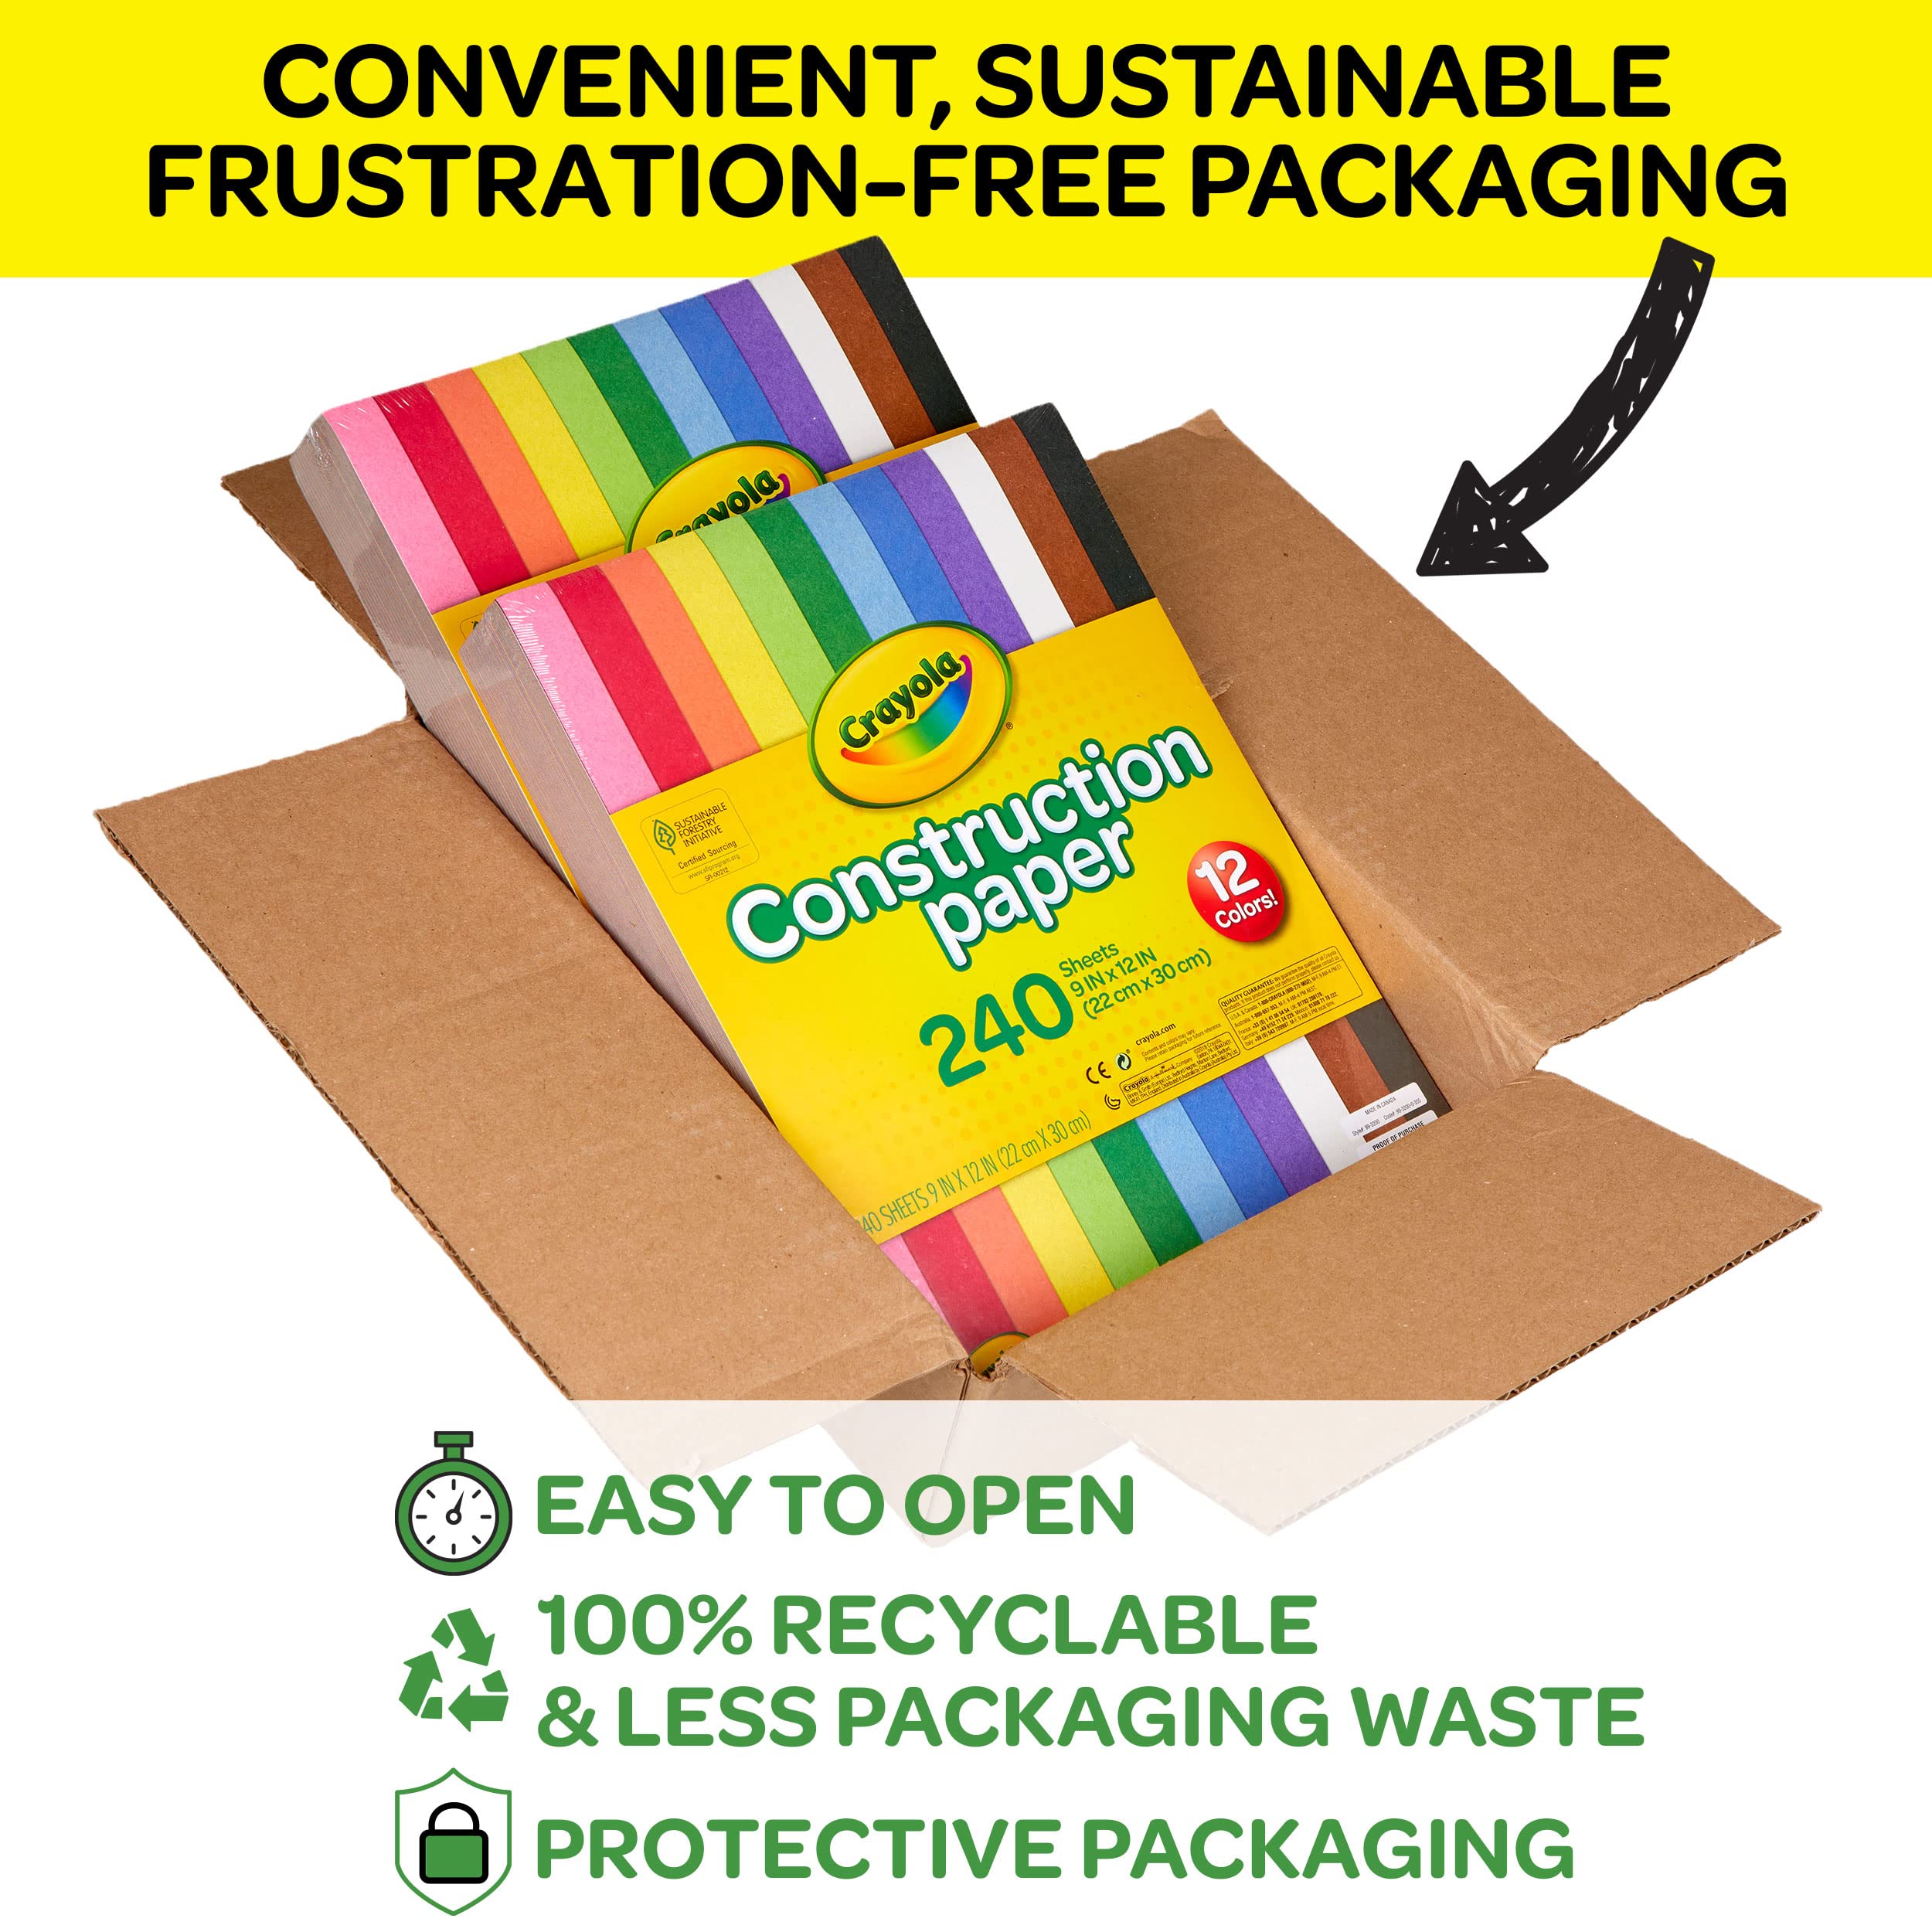 Crayola Construction Paper - 480ct (2 Pack), Bulk School Supplies For Kids, Classroom Supplies for Preschool, Elementary, Great for Arts & Crafts